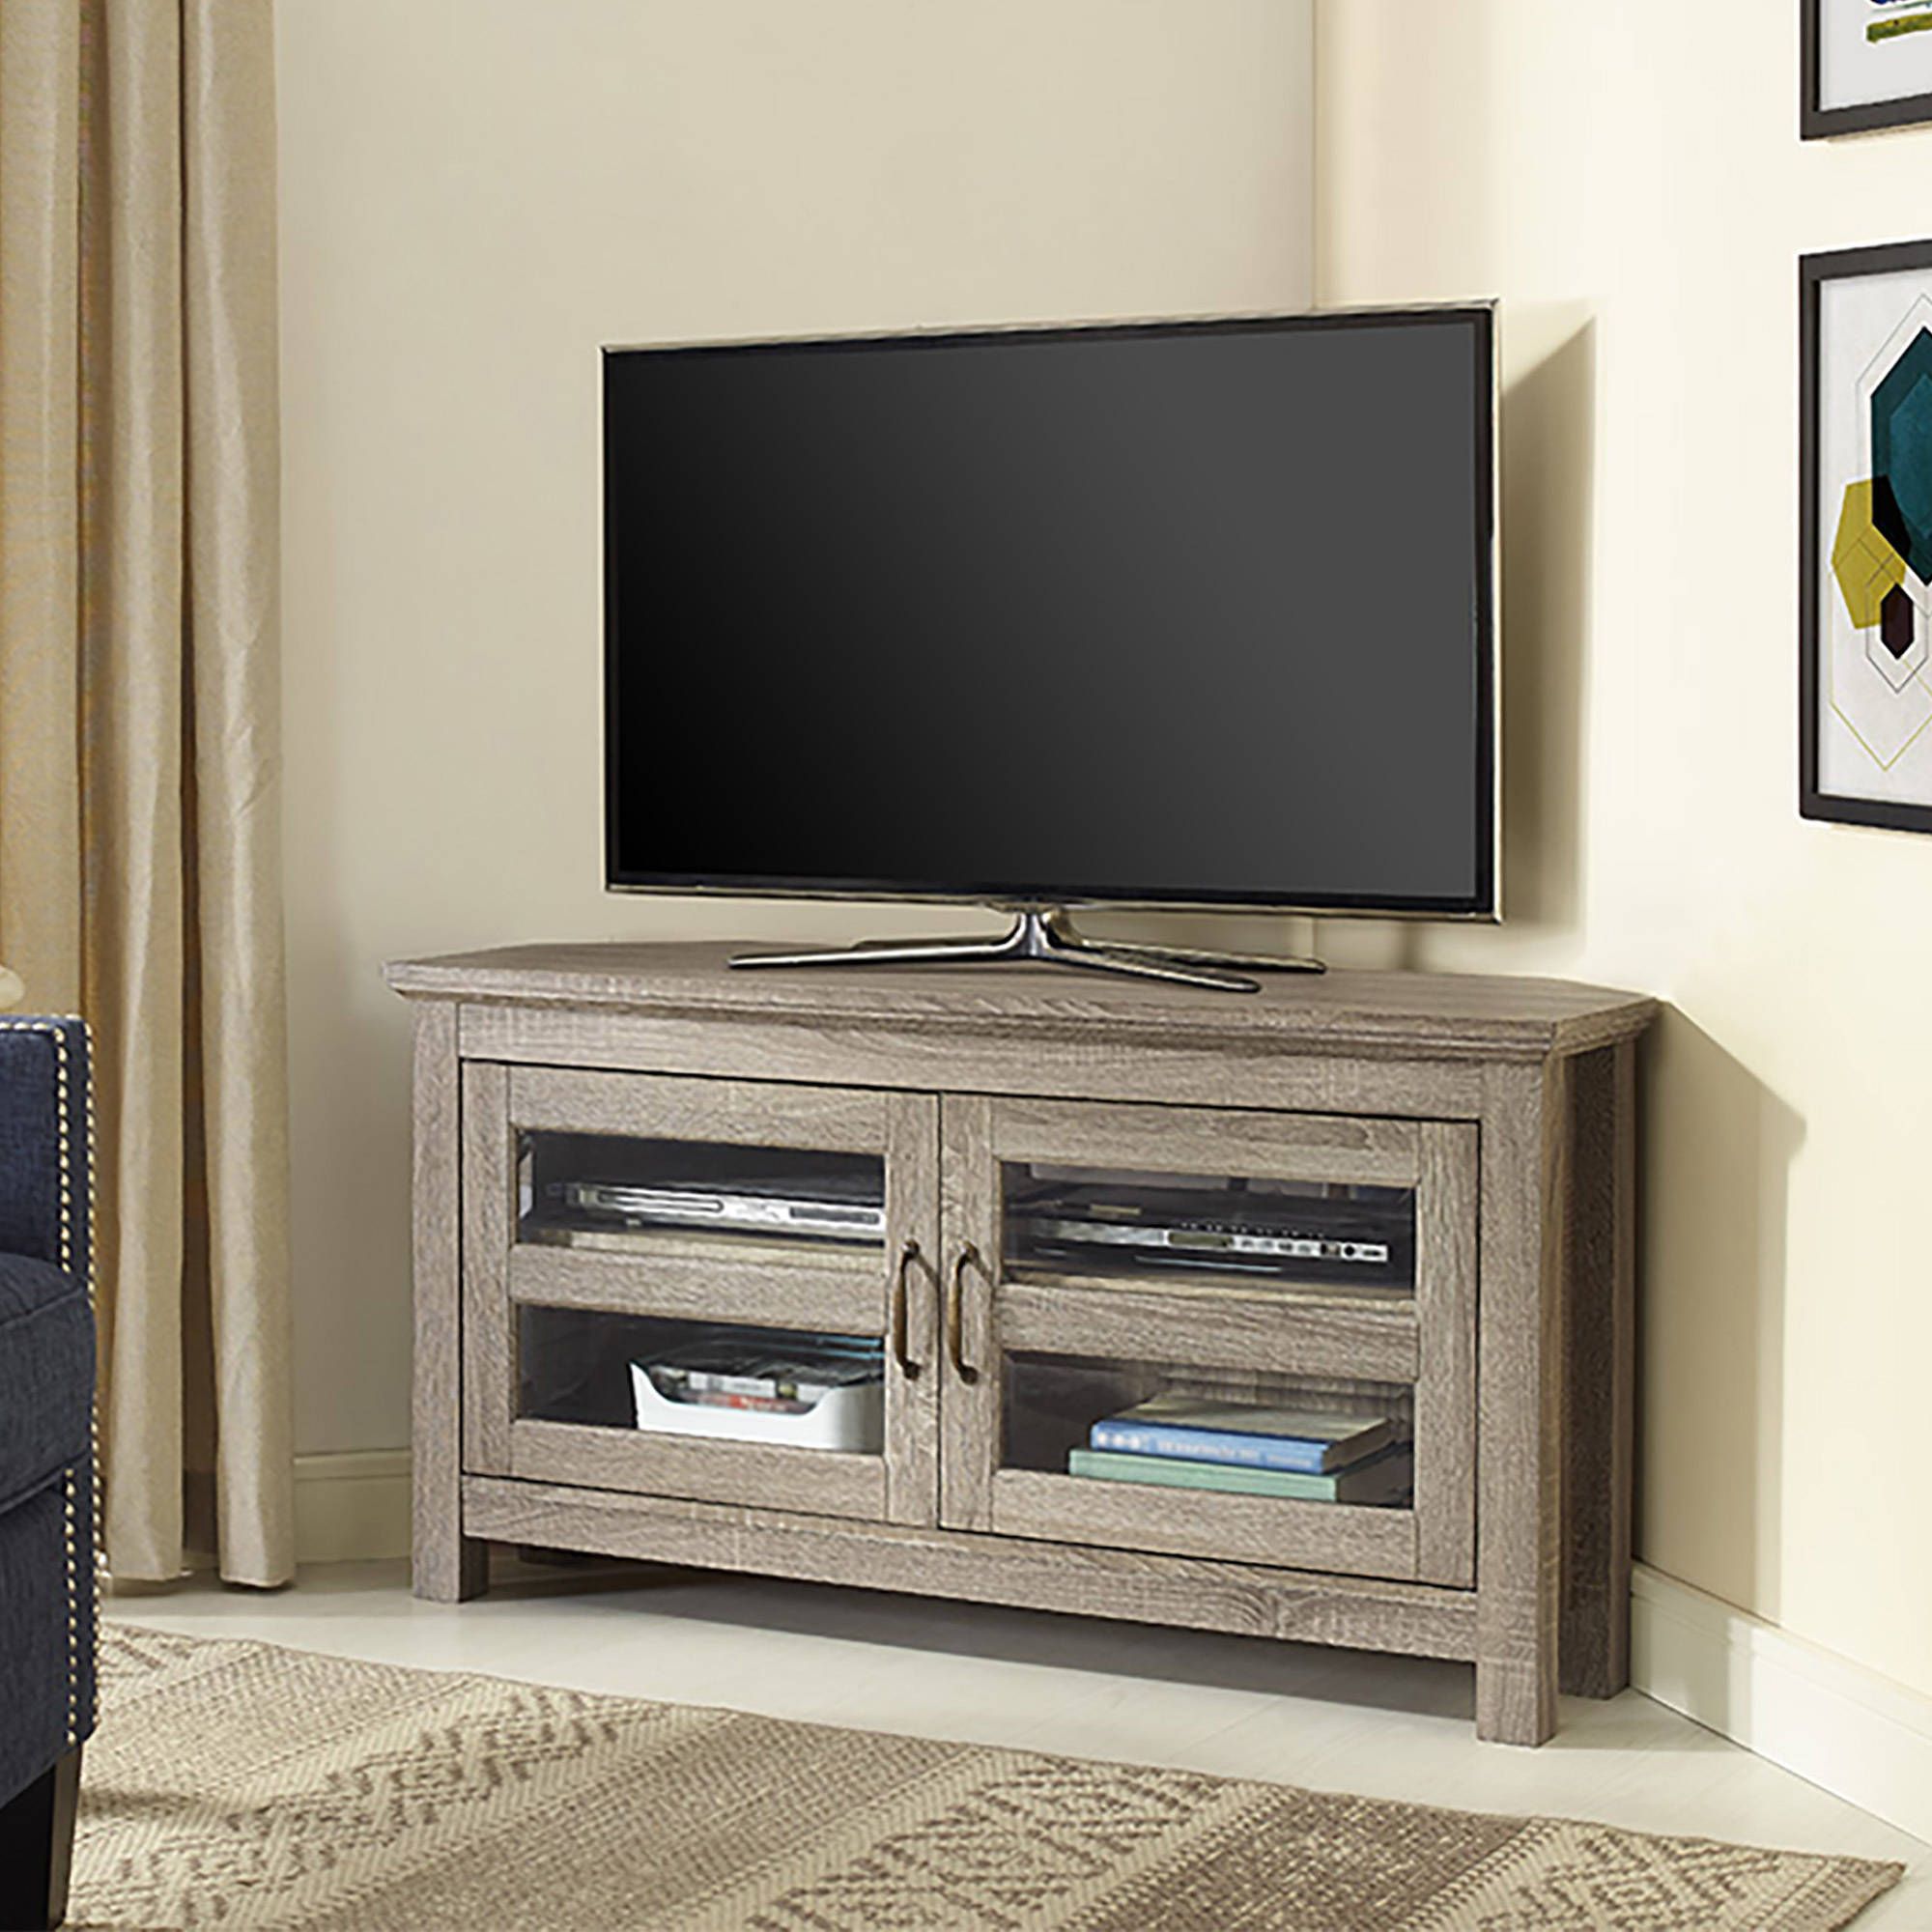 Walker Edison Black Corner Tv Stand For Tvs Up To 48 Intended For Cream Corner Tv Stands (View 6 of 15)